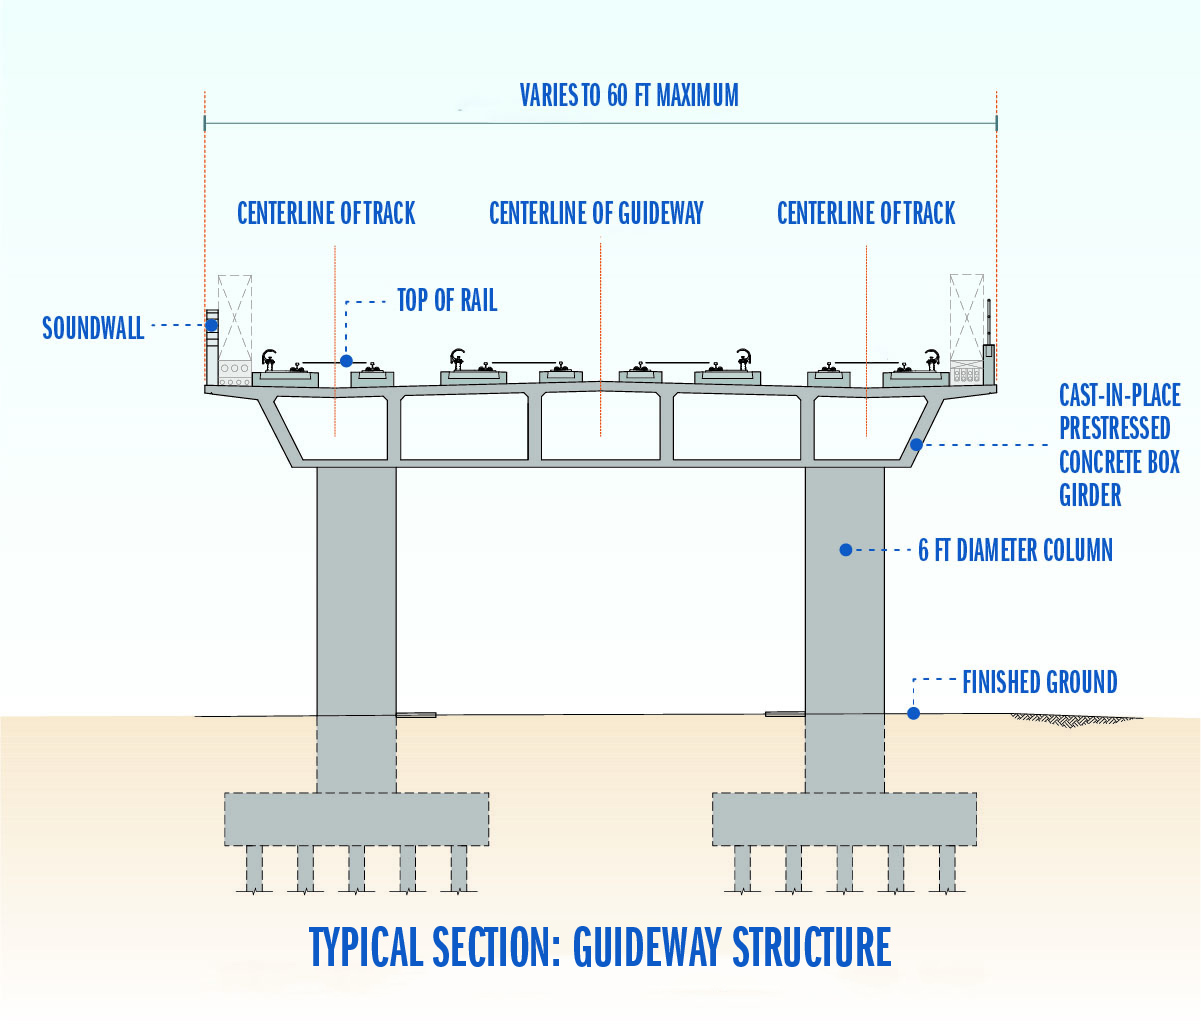 drawing of a typical section of a guideway structure